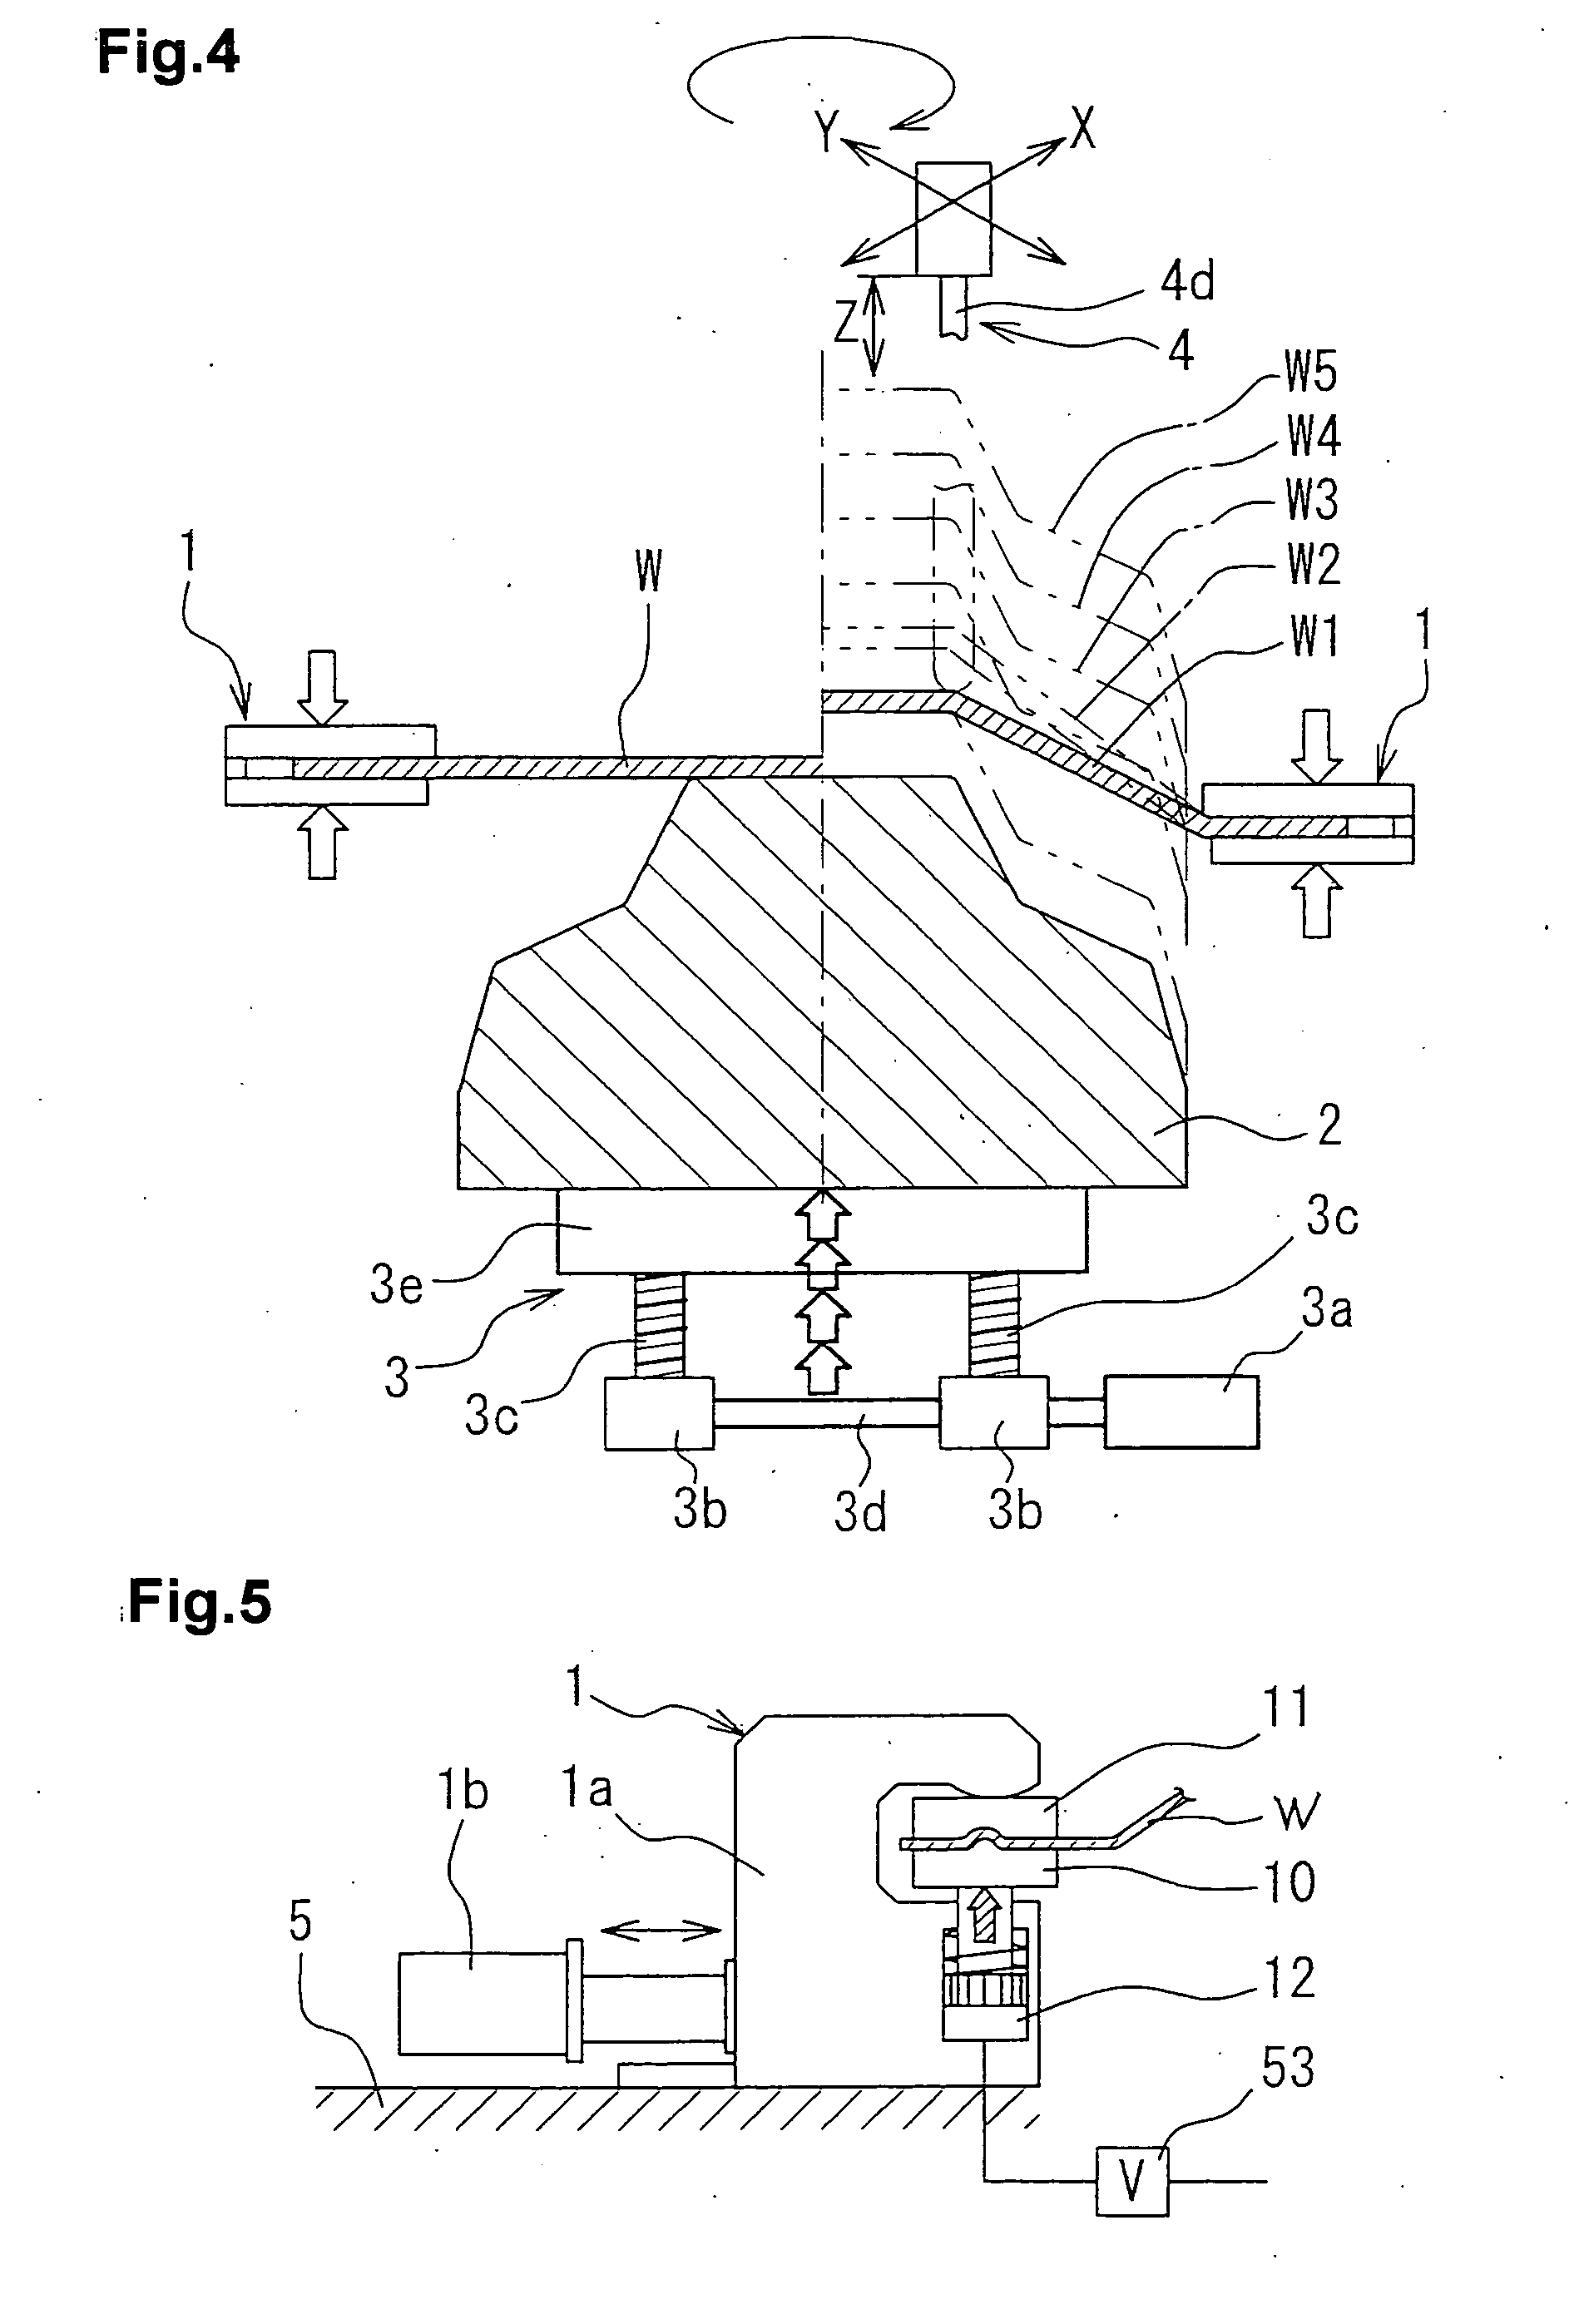 Method and apparatus for forming sheet metal